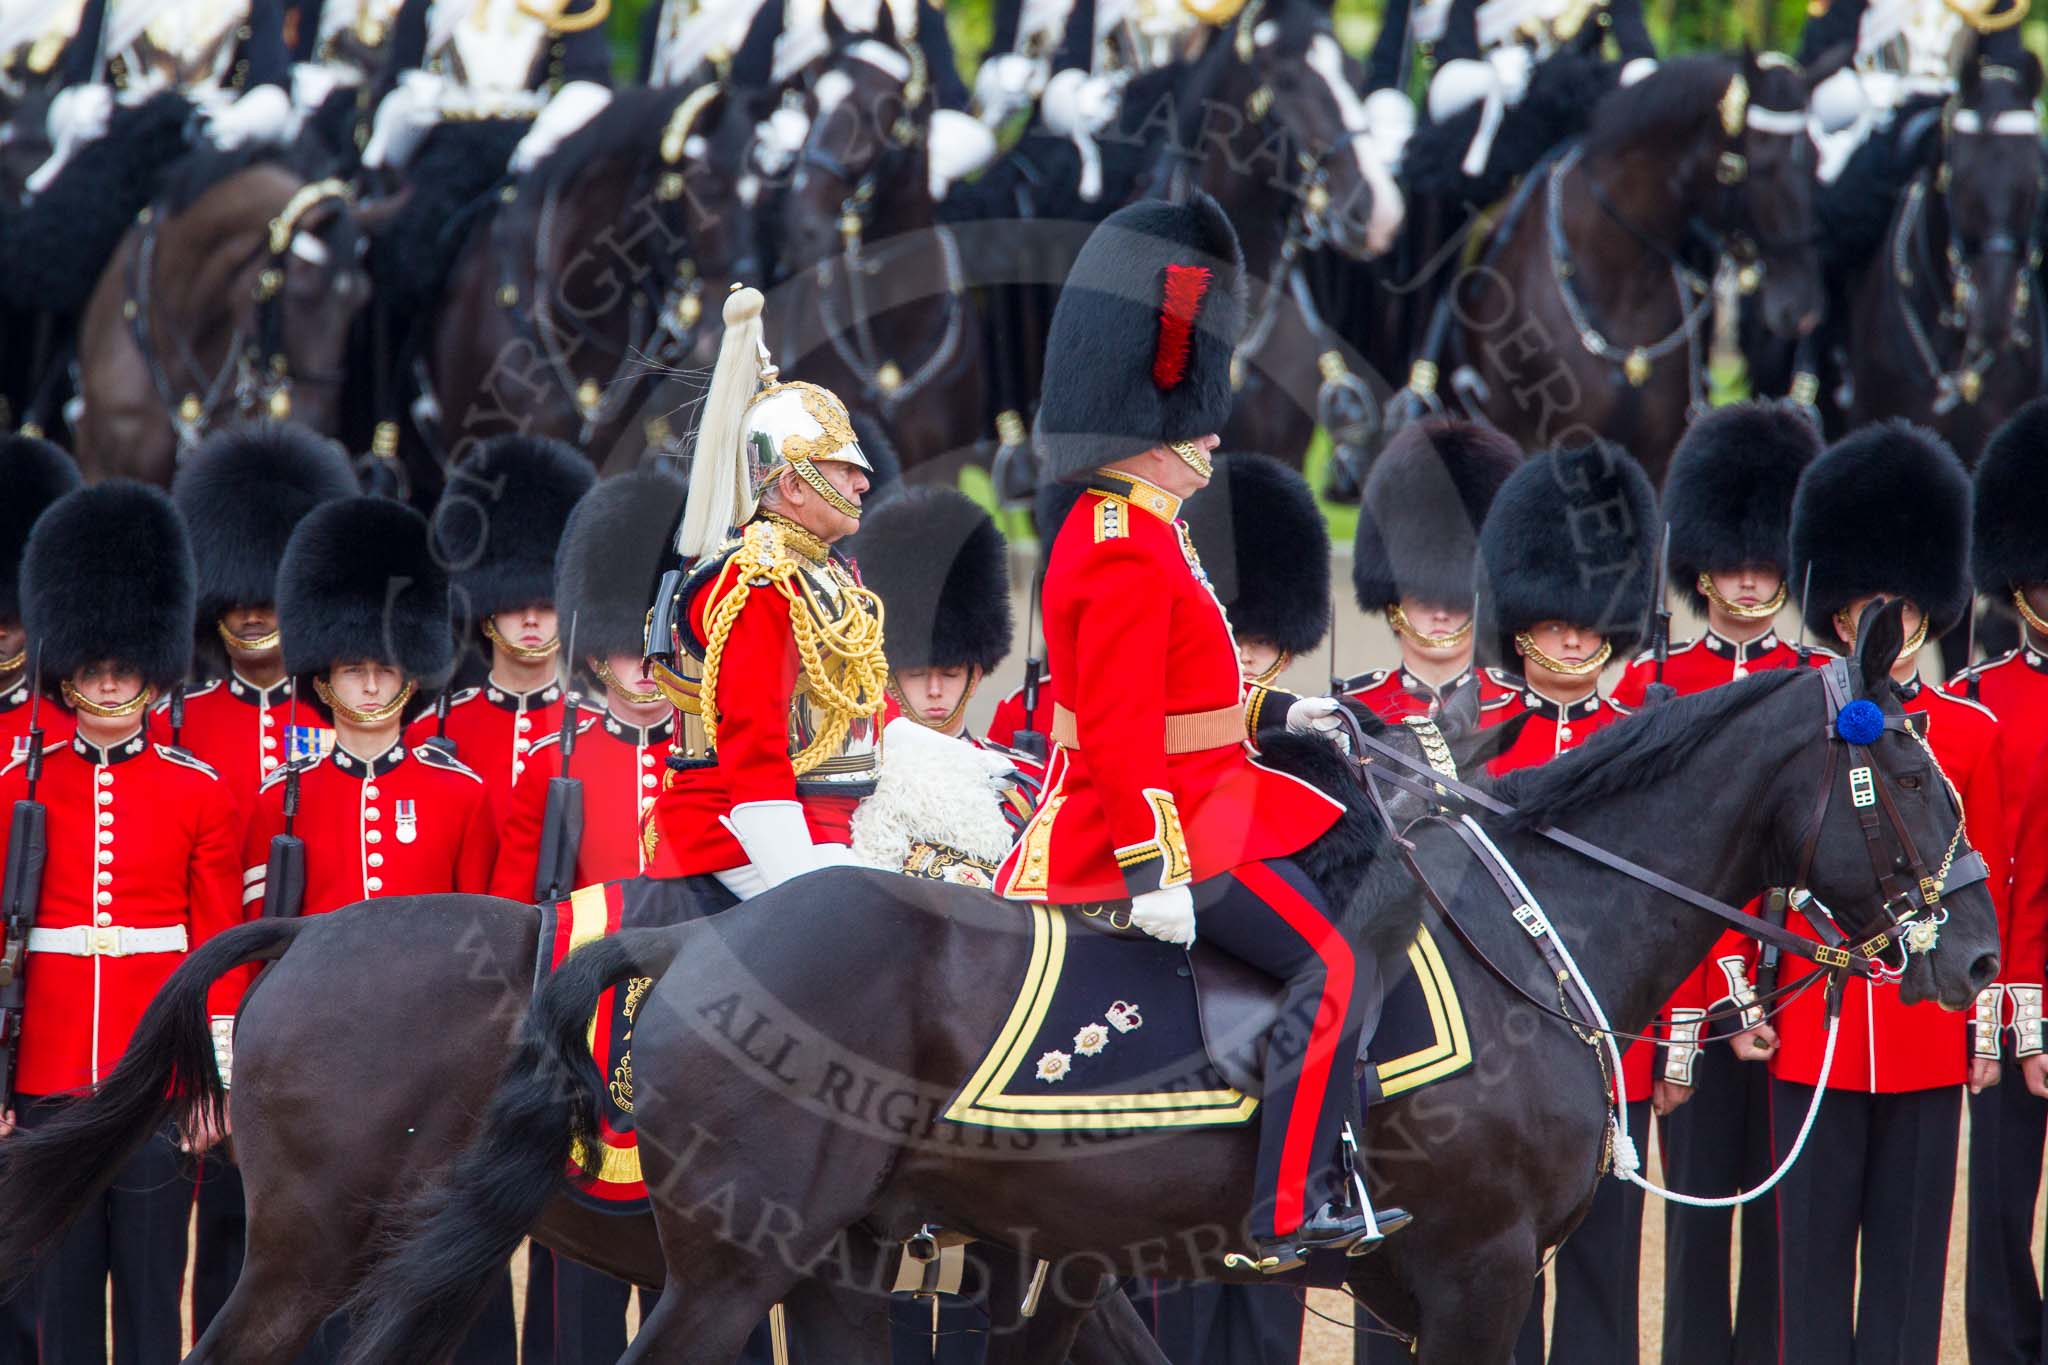 Trooping the Colour 2014.
Horse Guards Parade, Westminster,
London SW1A,

United Kingdom,
on 14 June 2014 at 11:04, image #409